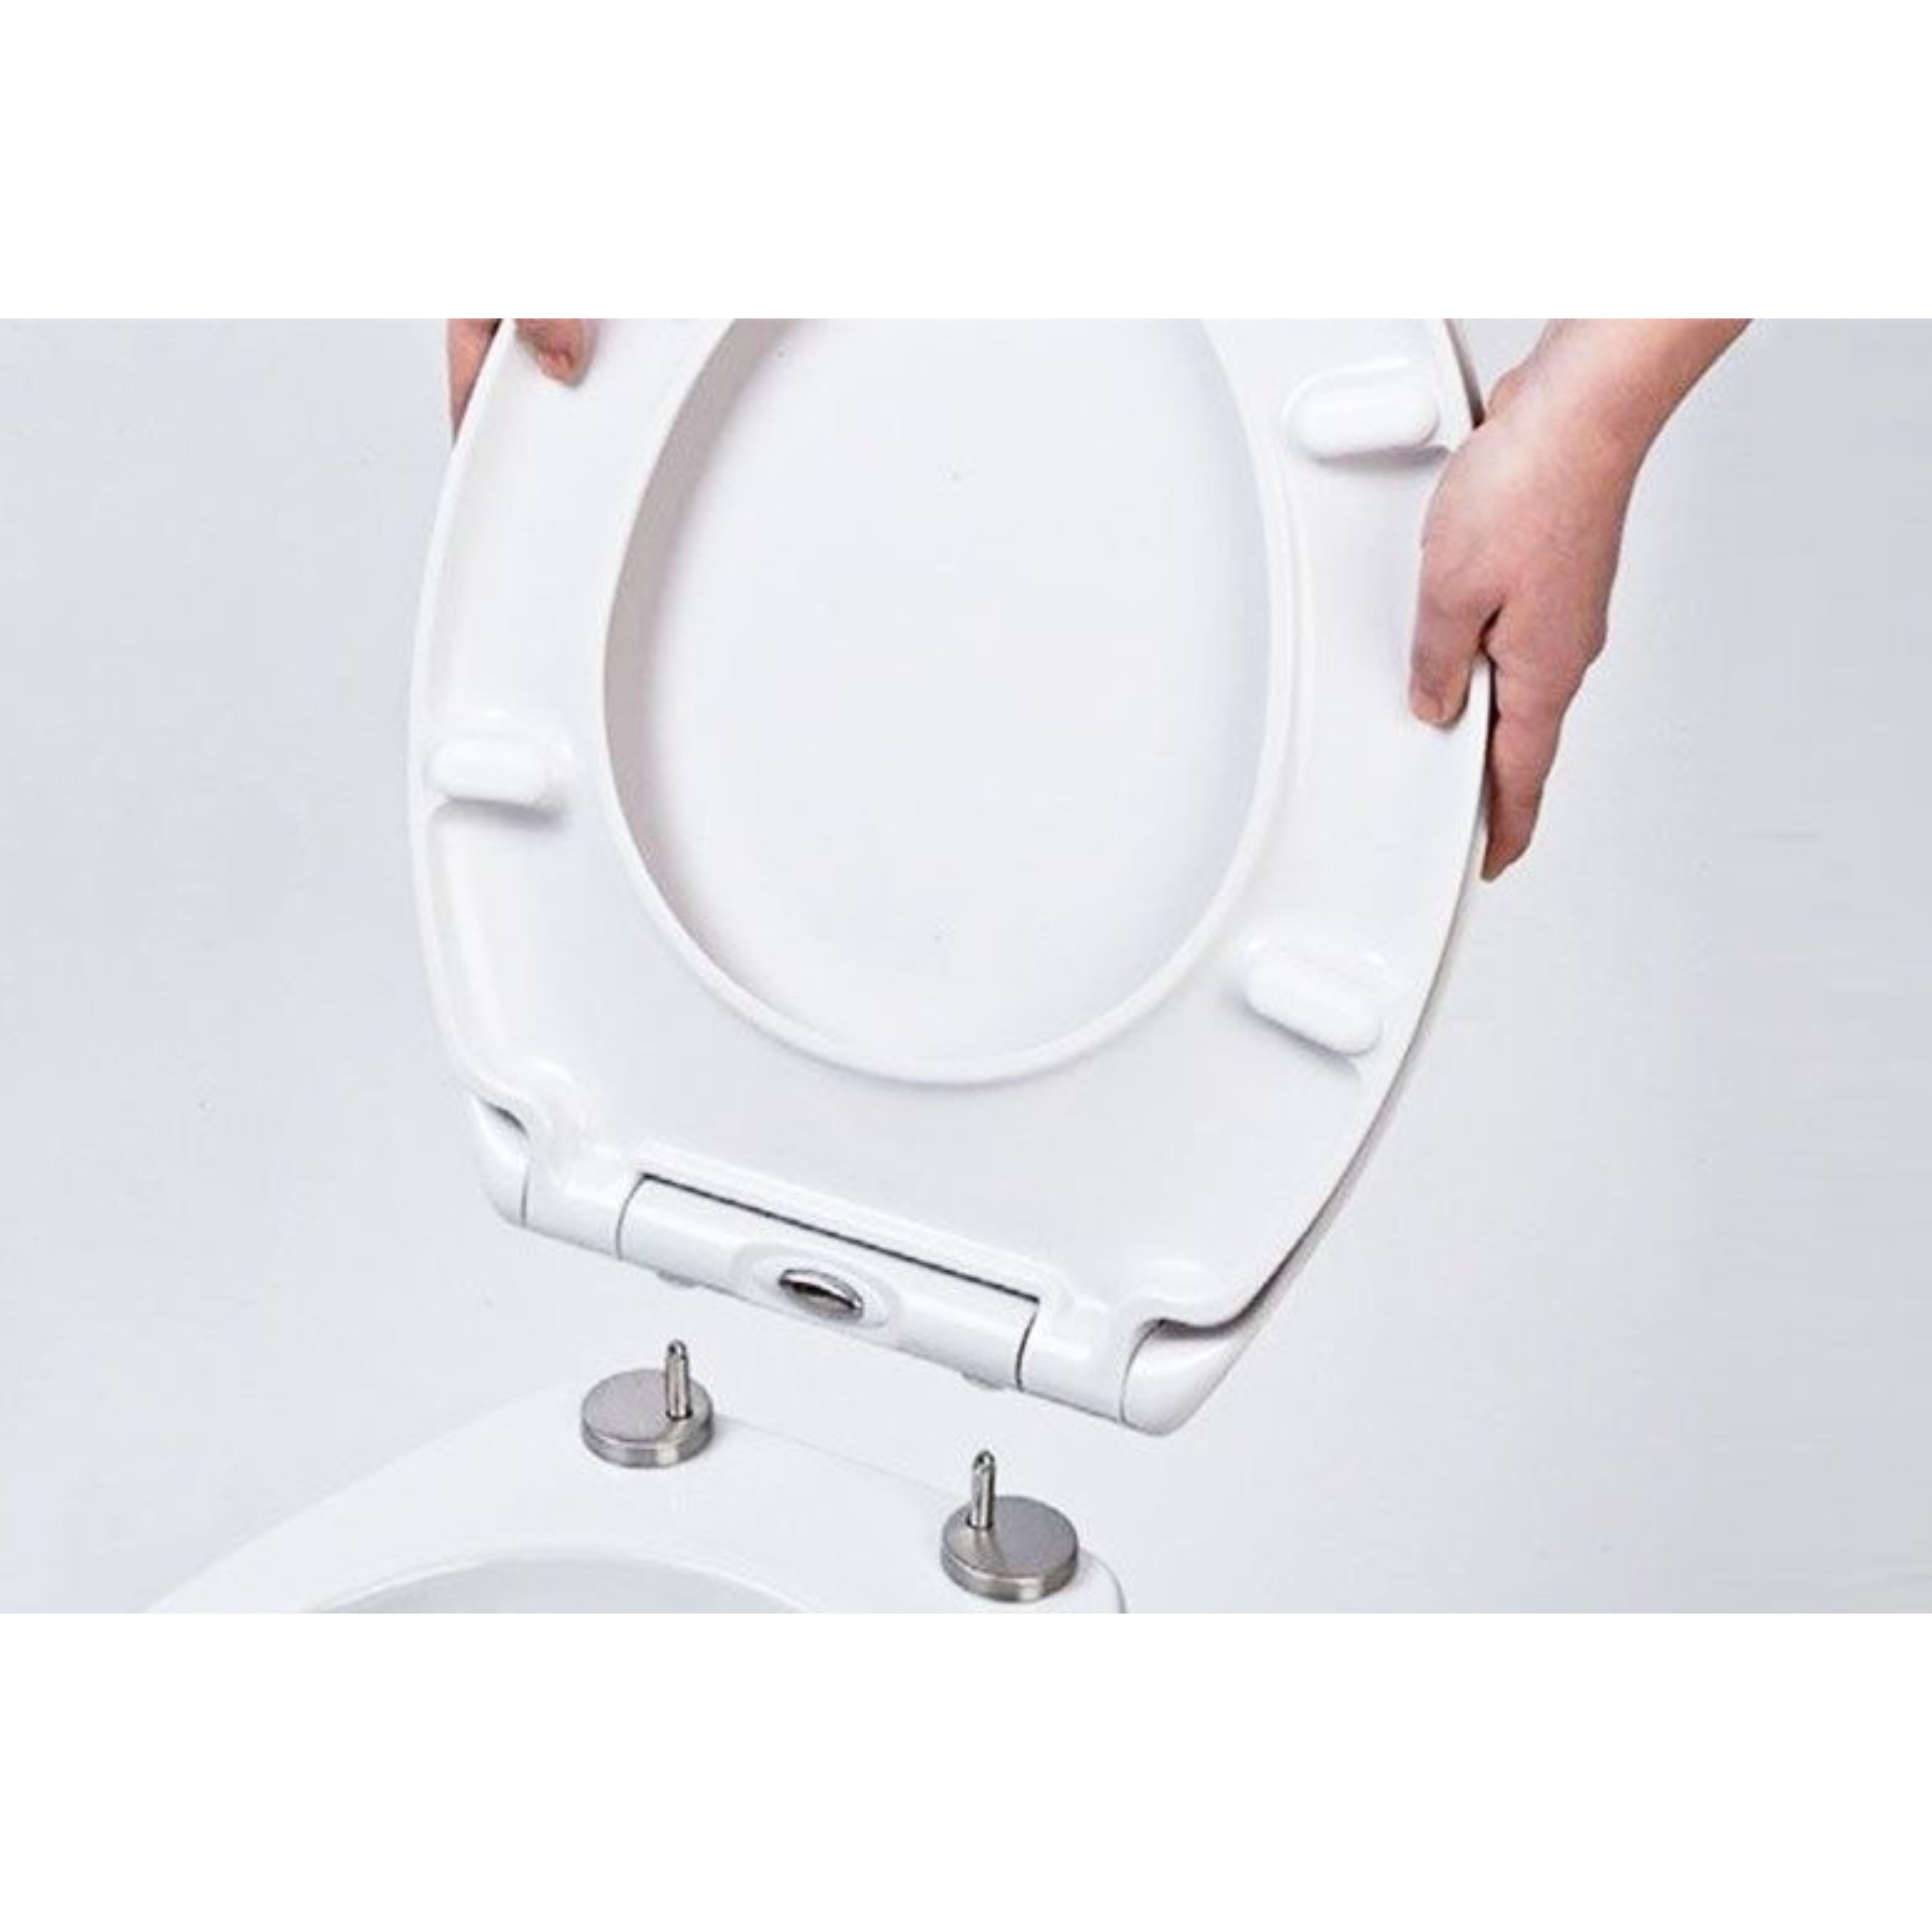 Top-fixing, Soft closing hinges, Toilet seat cover full service